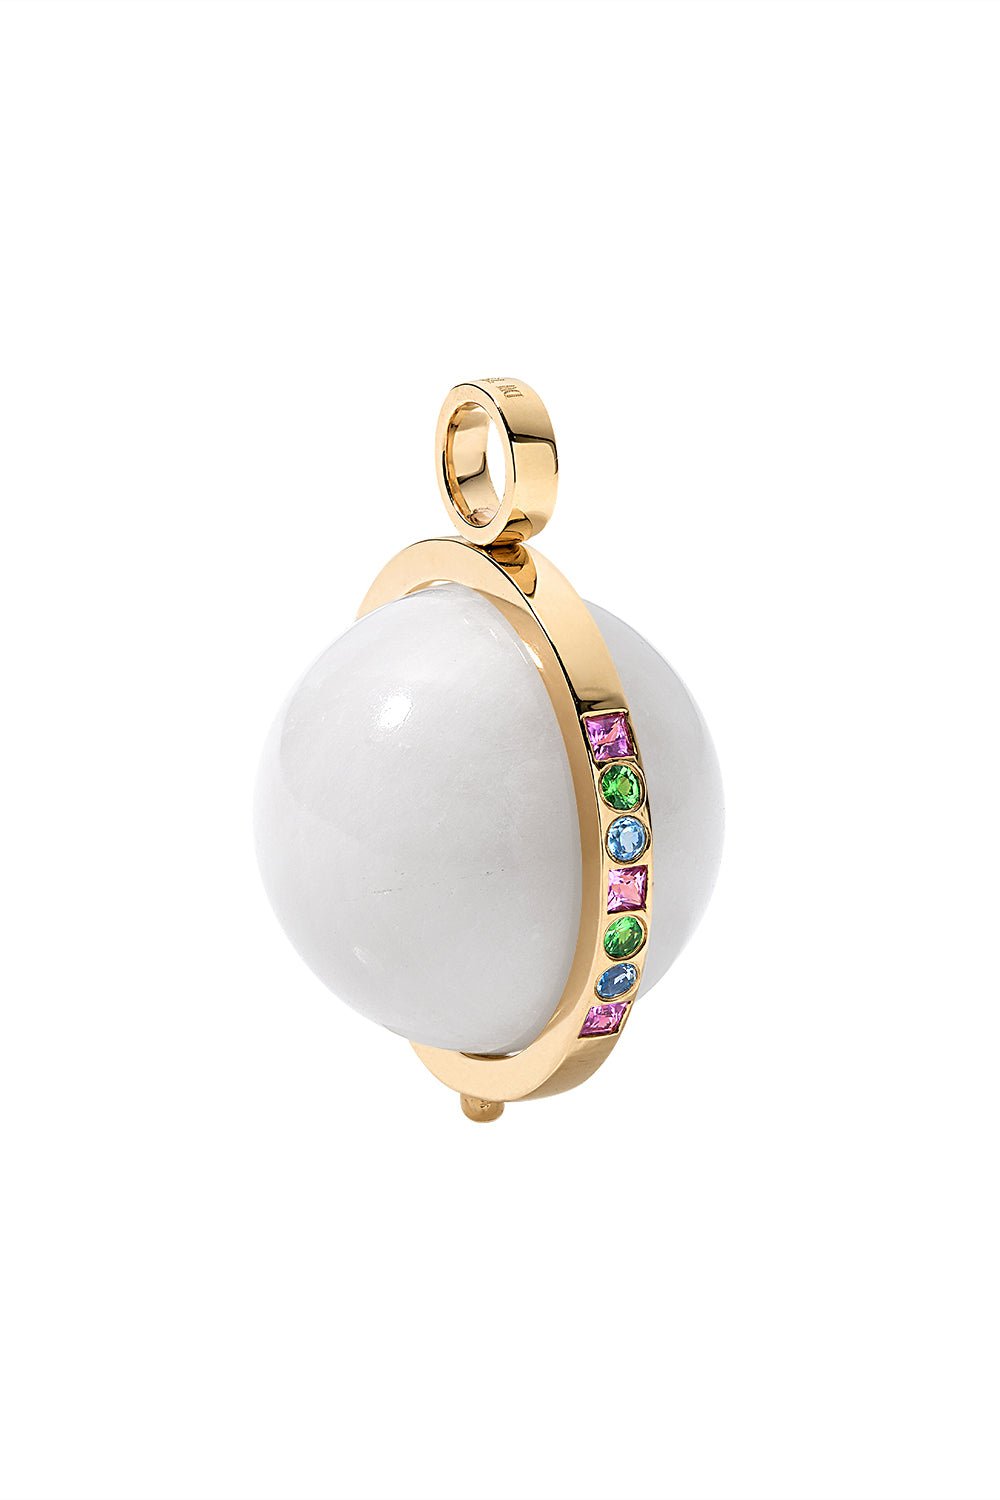 DEVON WOODHILL-Deluxe Cosmic White Agate Spinner Charm-YELLOW GOLD